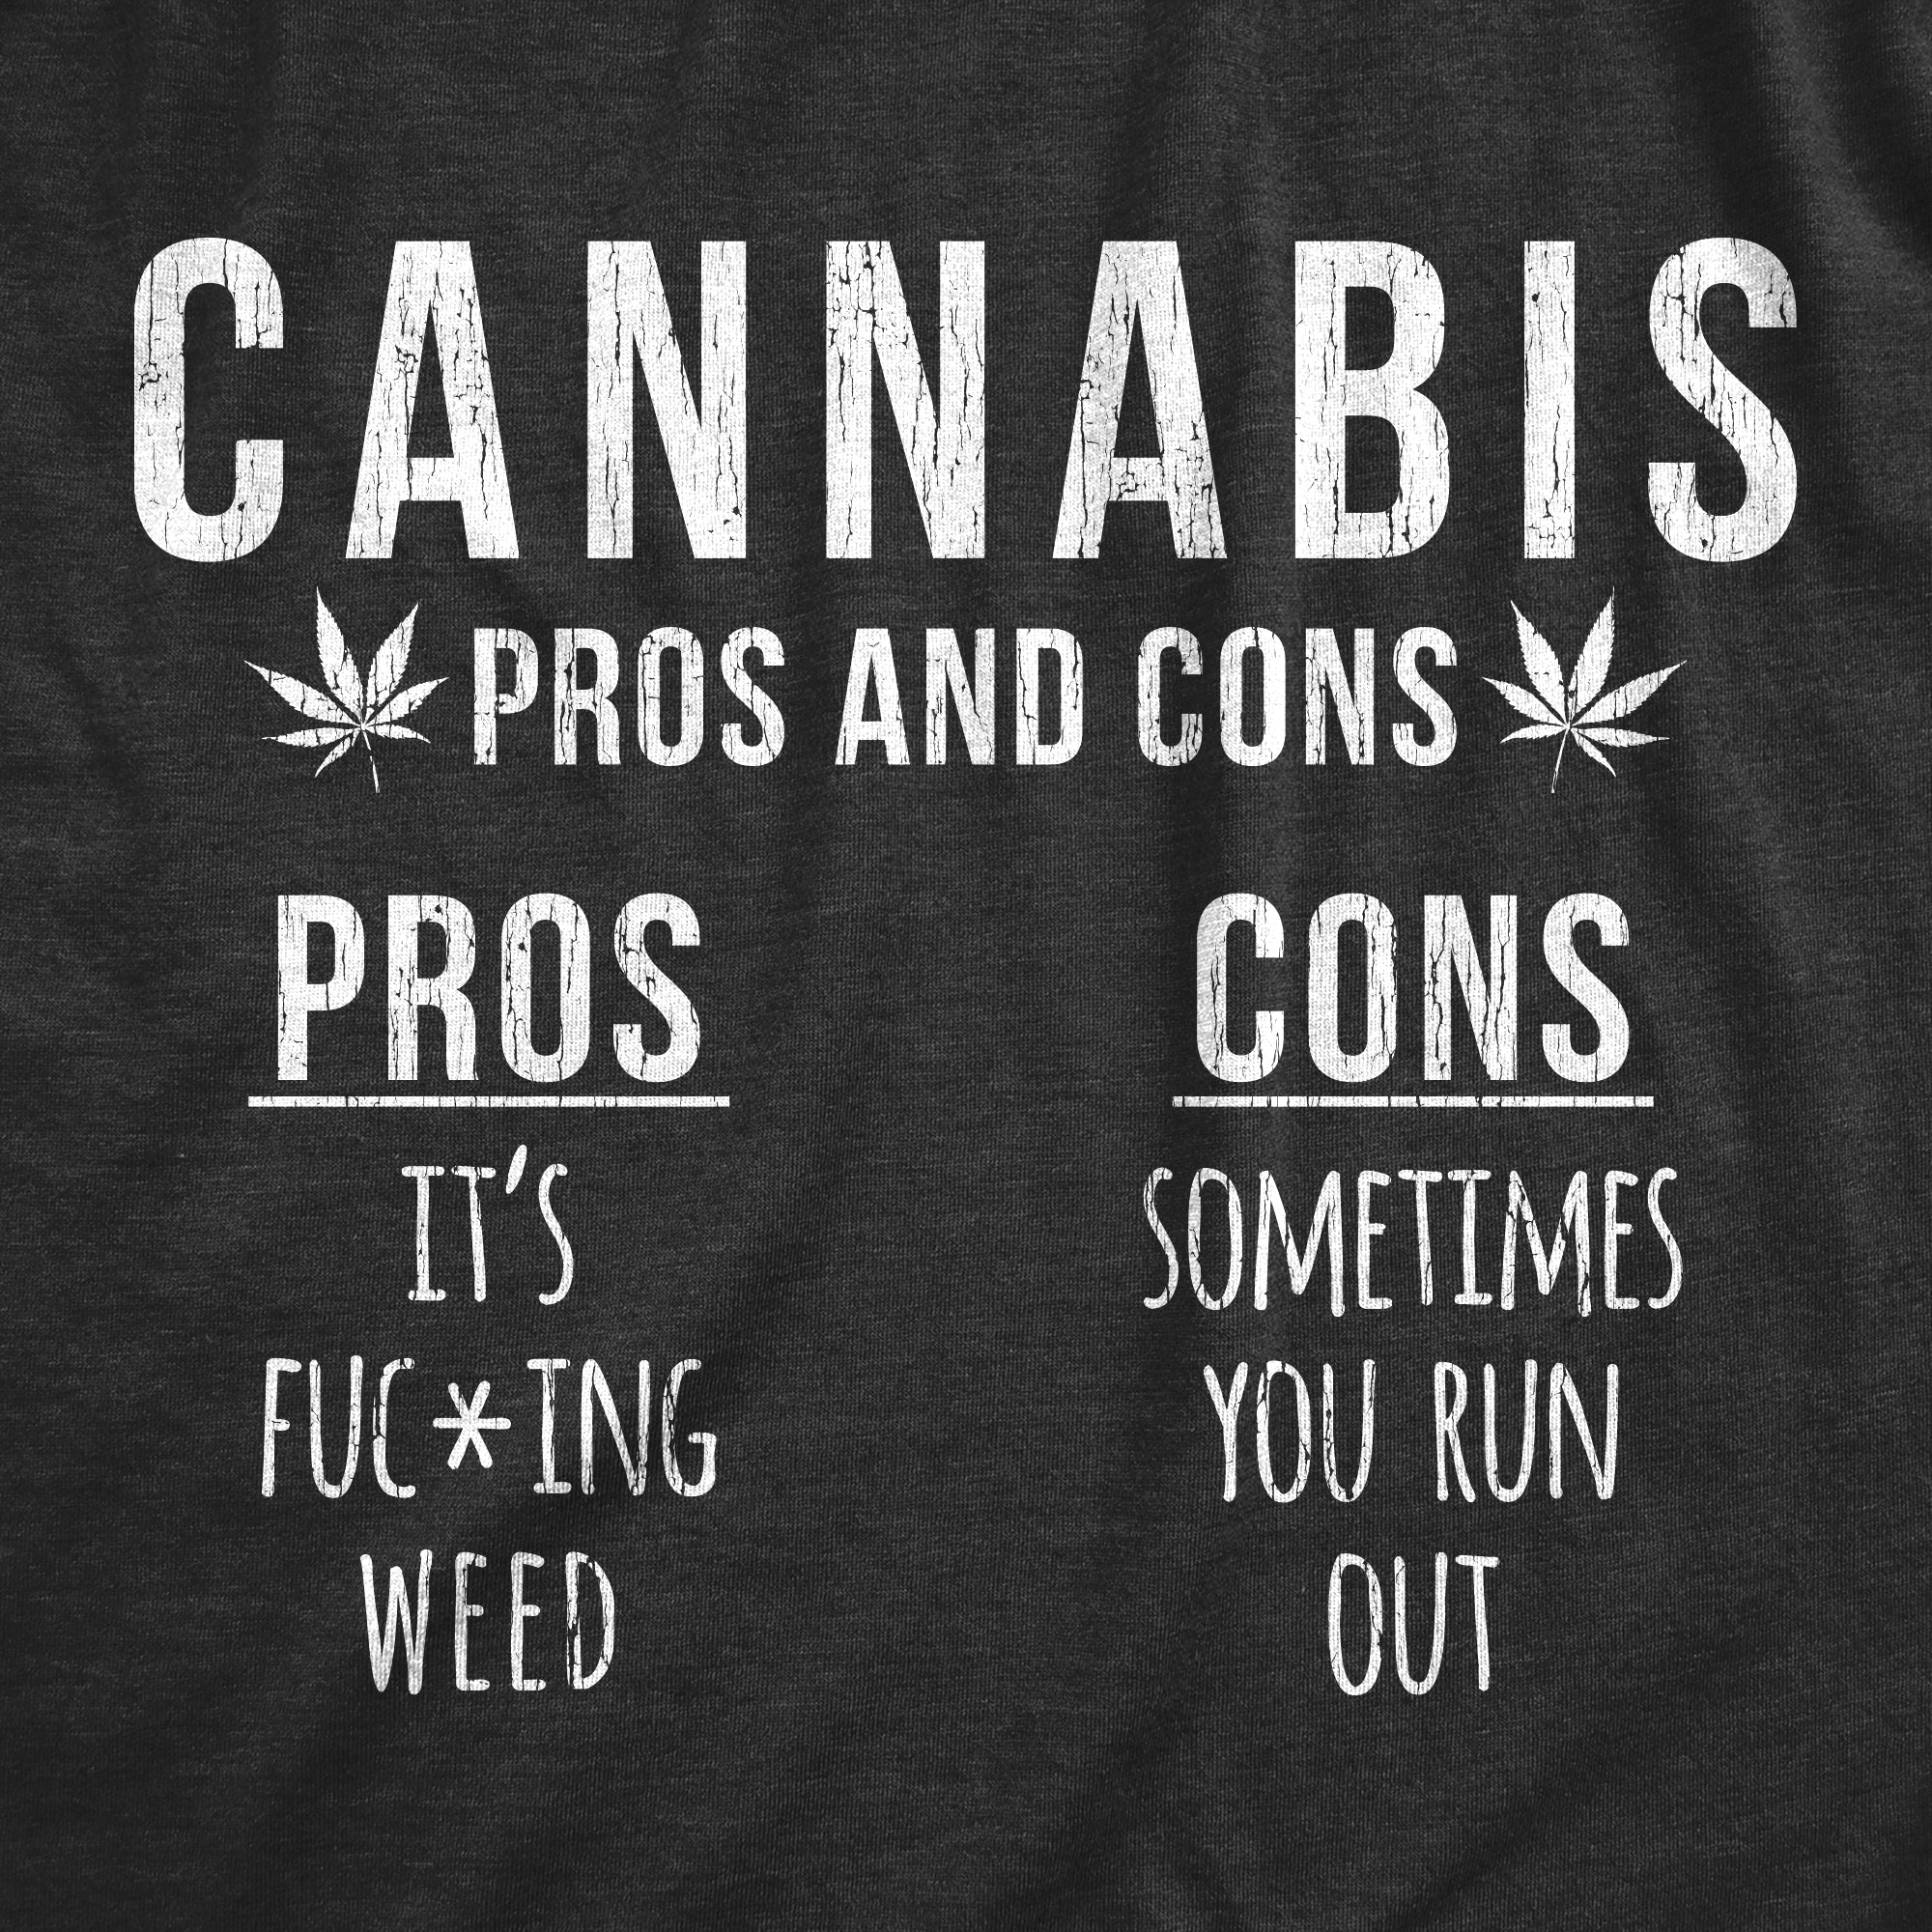 Funny Heather Black Cannabis Pros And Cons Mens T Shirt Nerdy 420 Tee